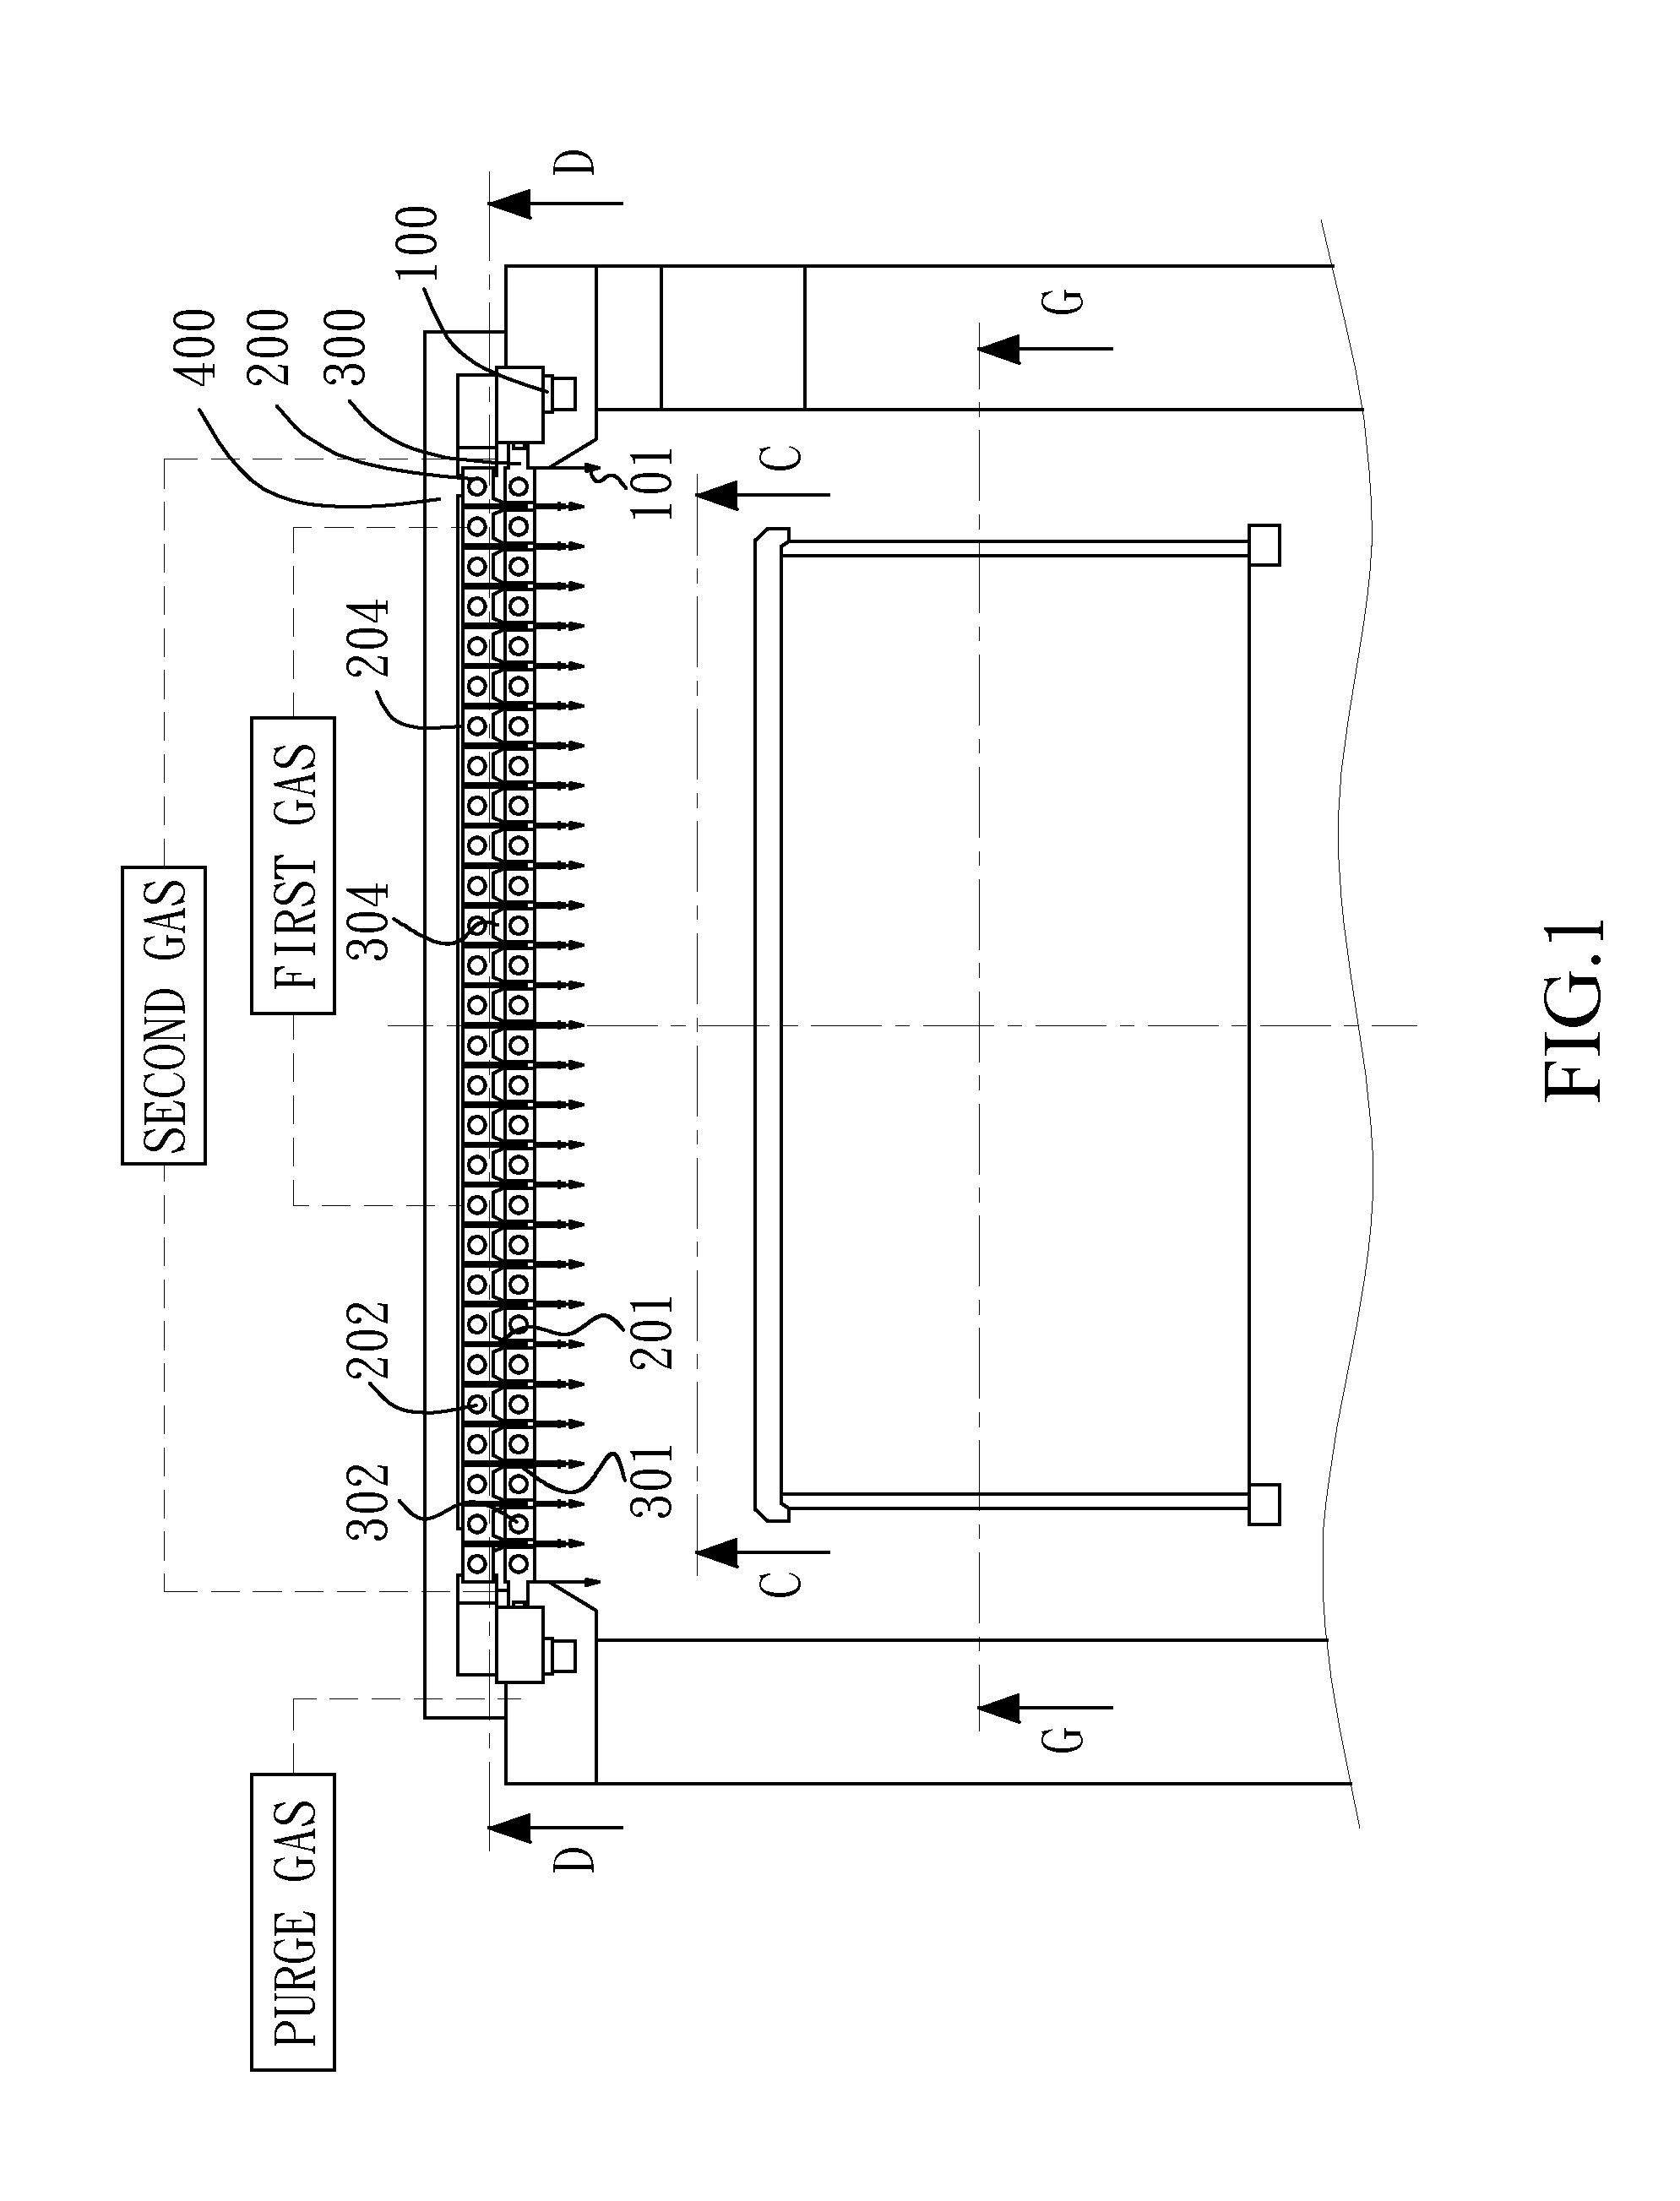 Gas Treatment Apparatus with Surrounding Spray Curtains